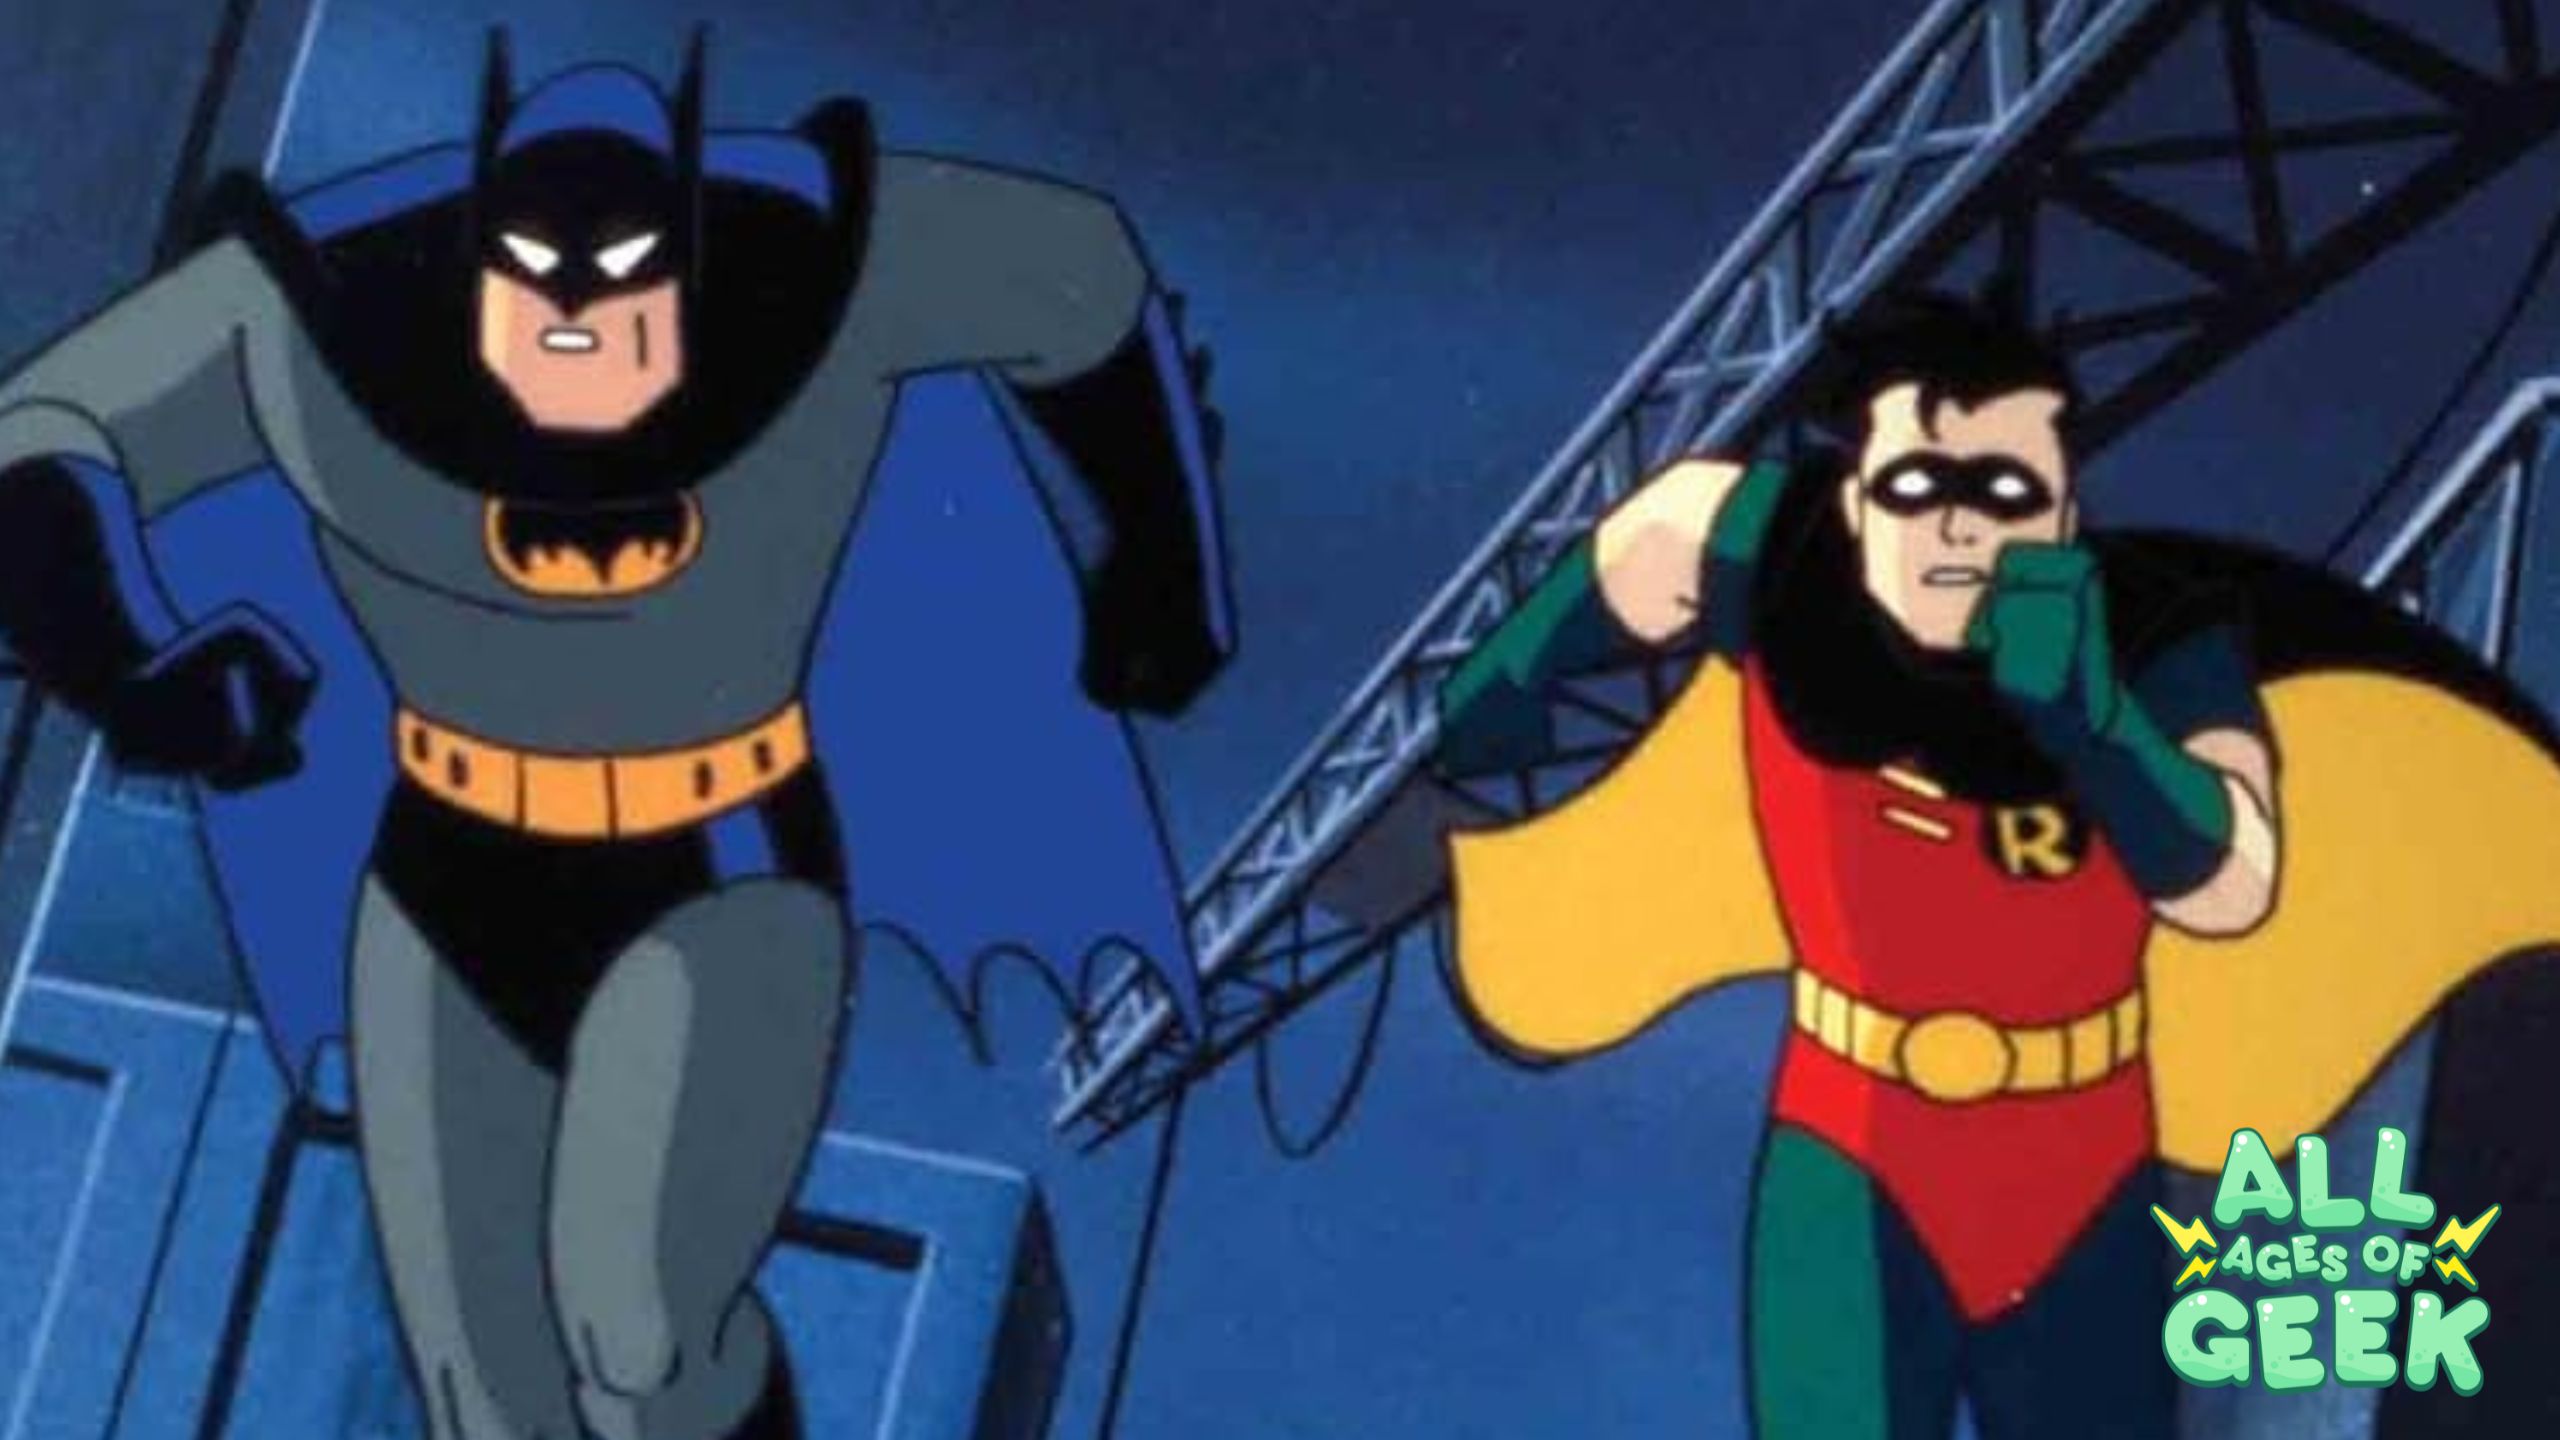 Which “Batman: The Animated Series” Character Are You? Take the Quiz to Find Out!